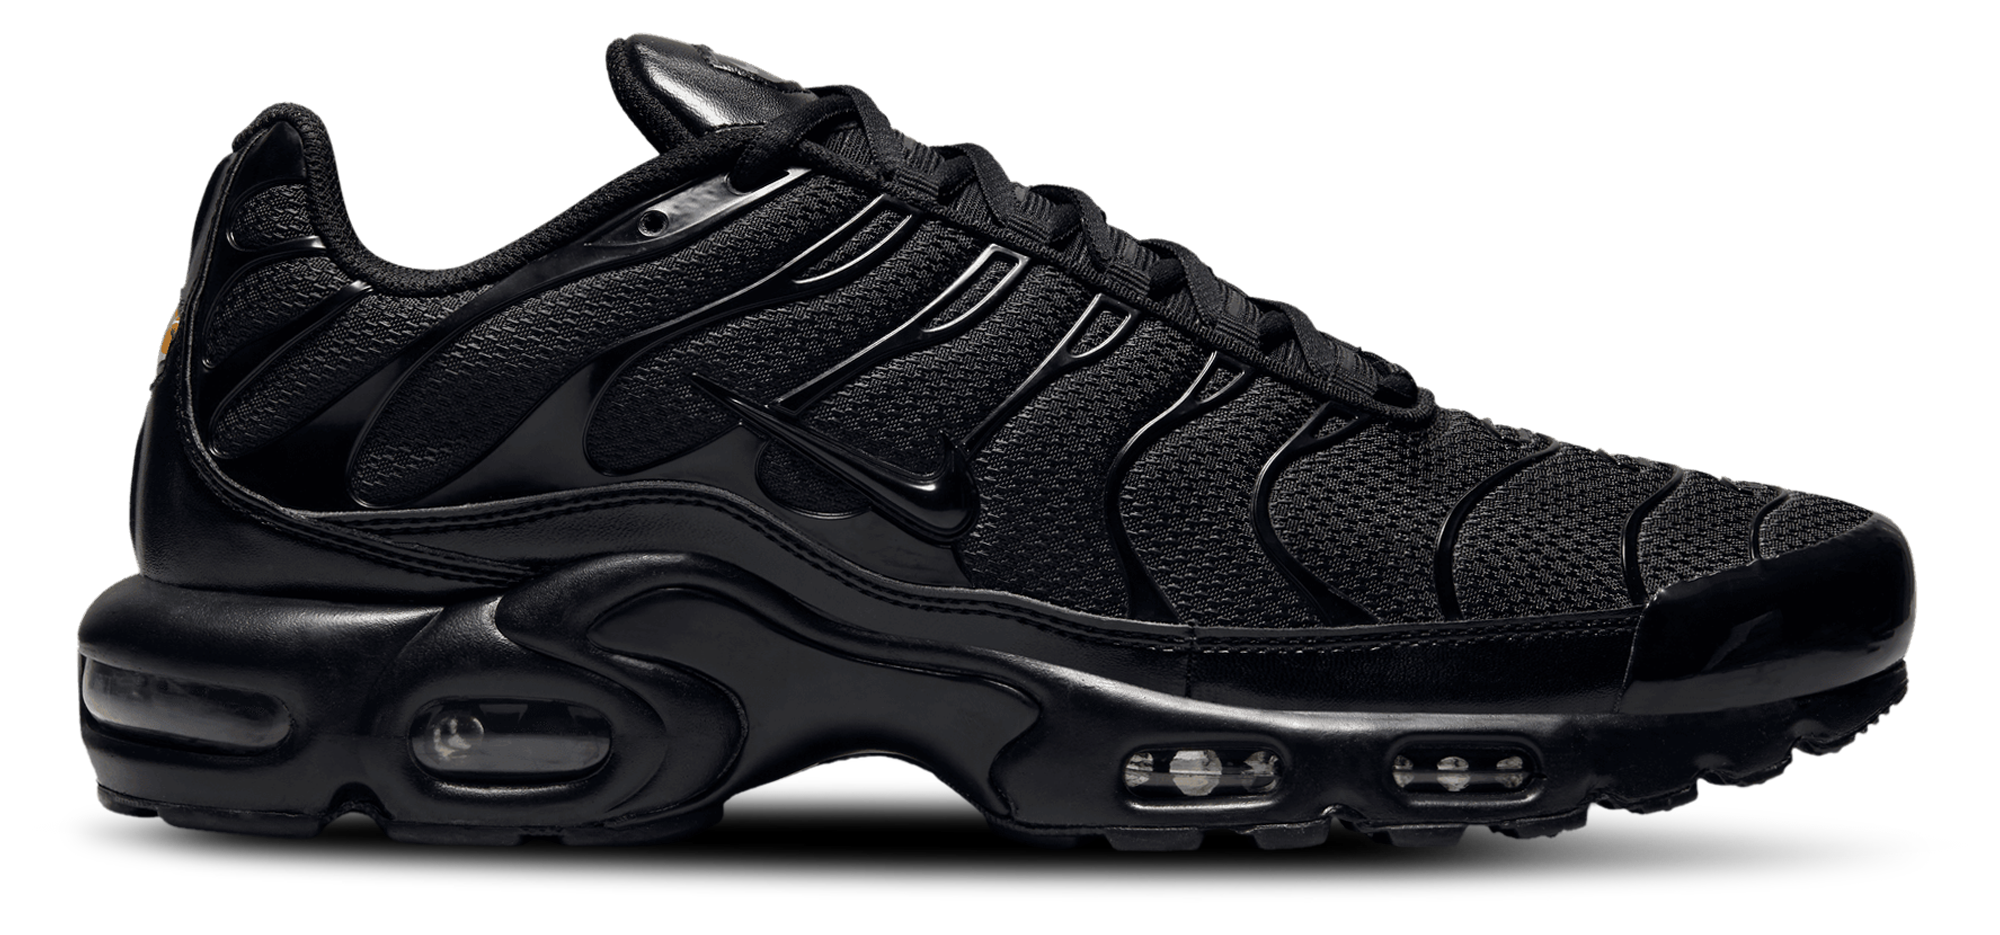 Panther they Wish Nike Air Max Plus | Foot Locker